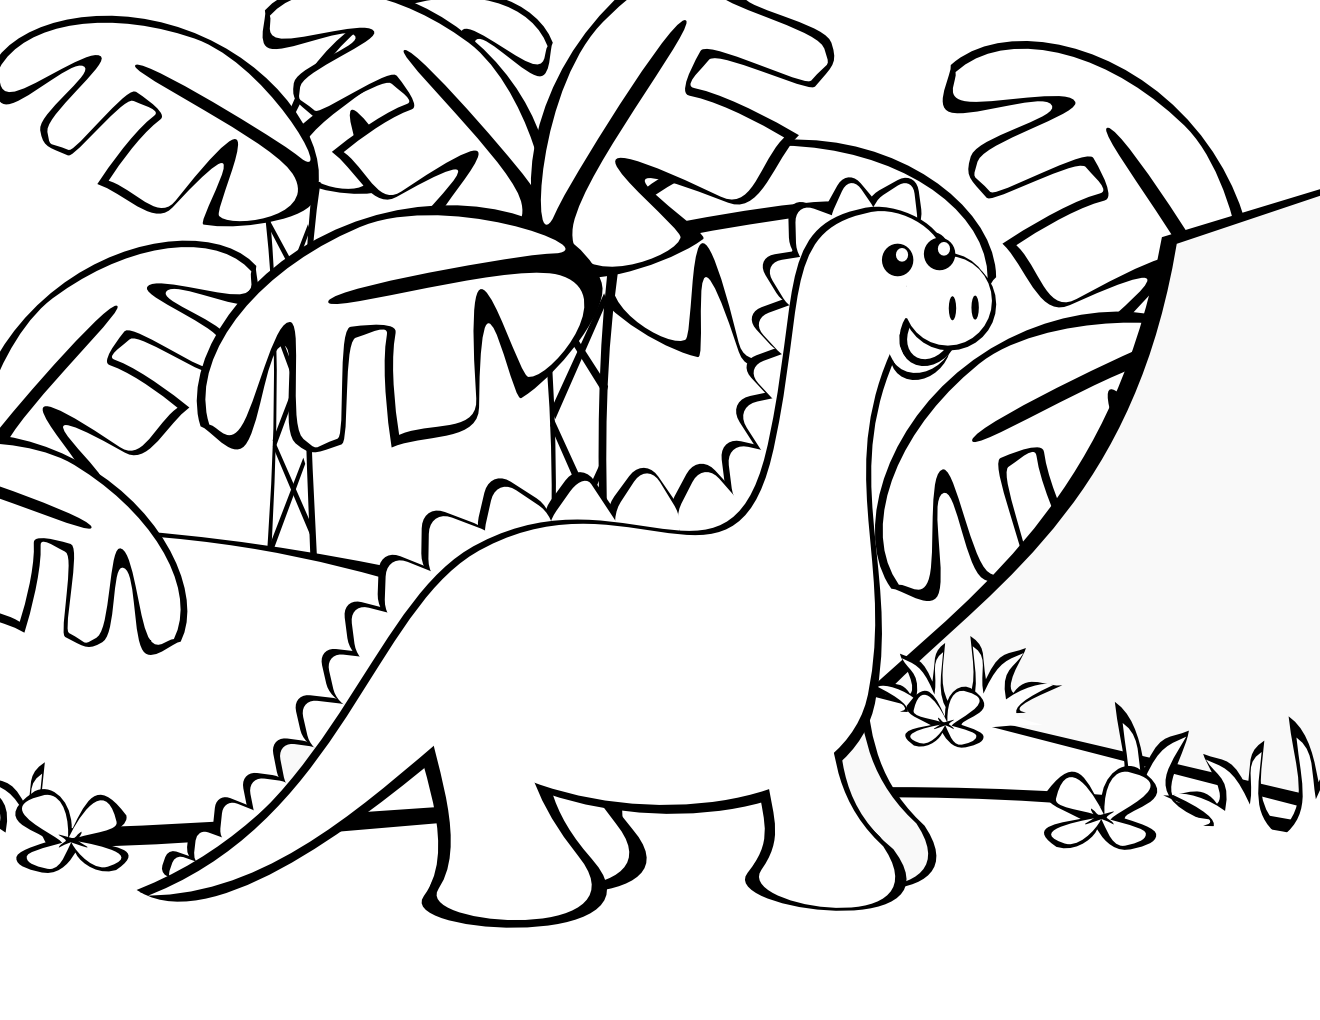 Download Free Coloring Pages: Dinosaur Coloring Pages